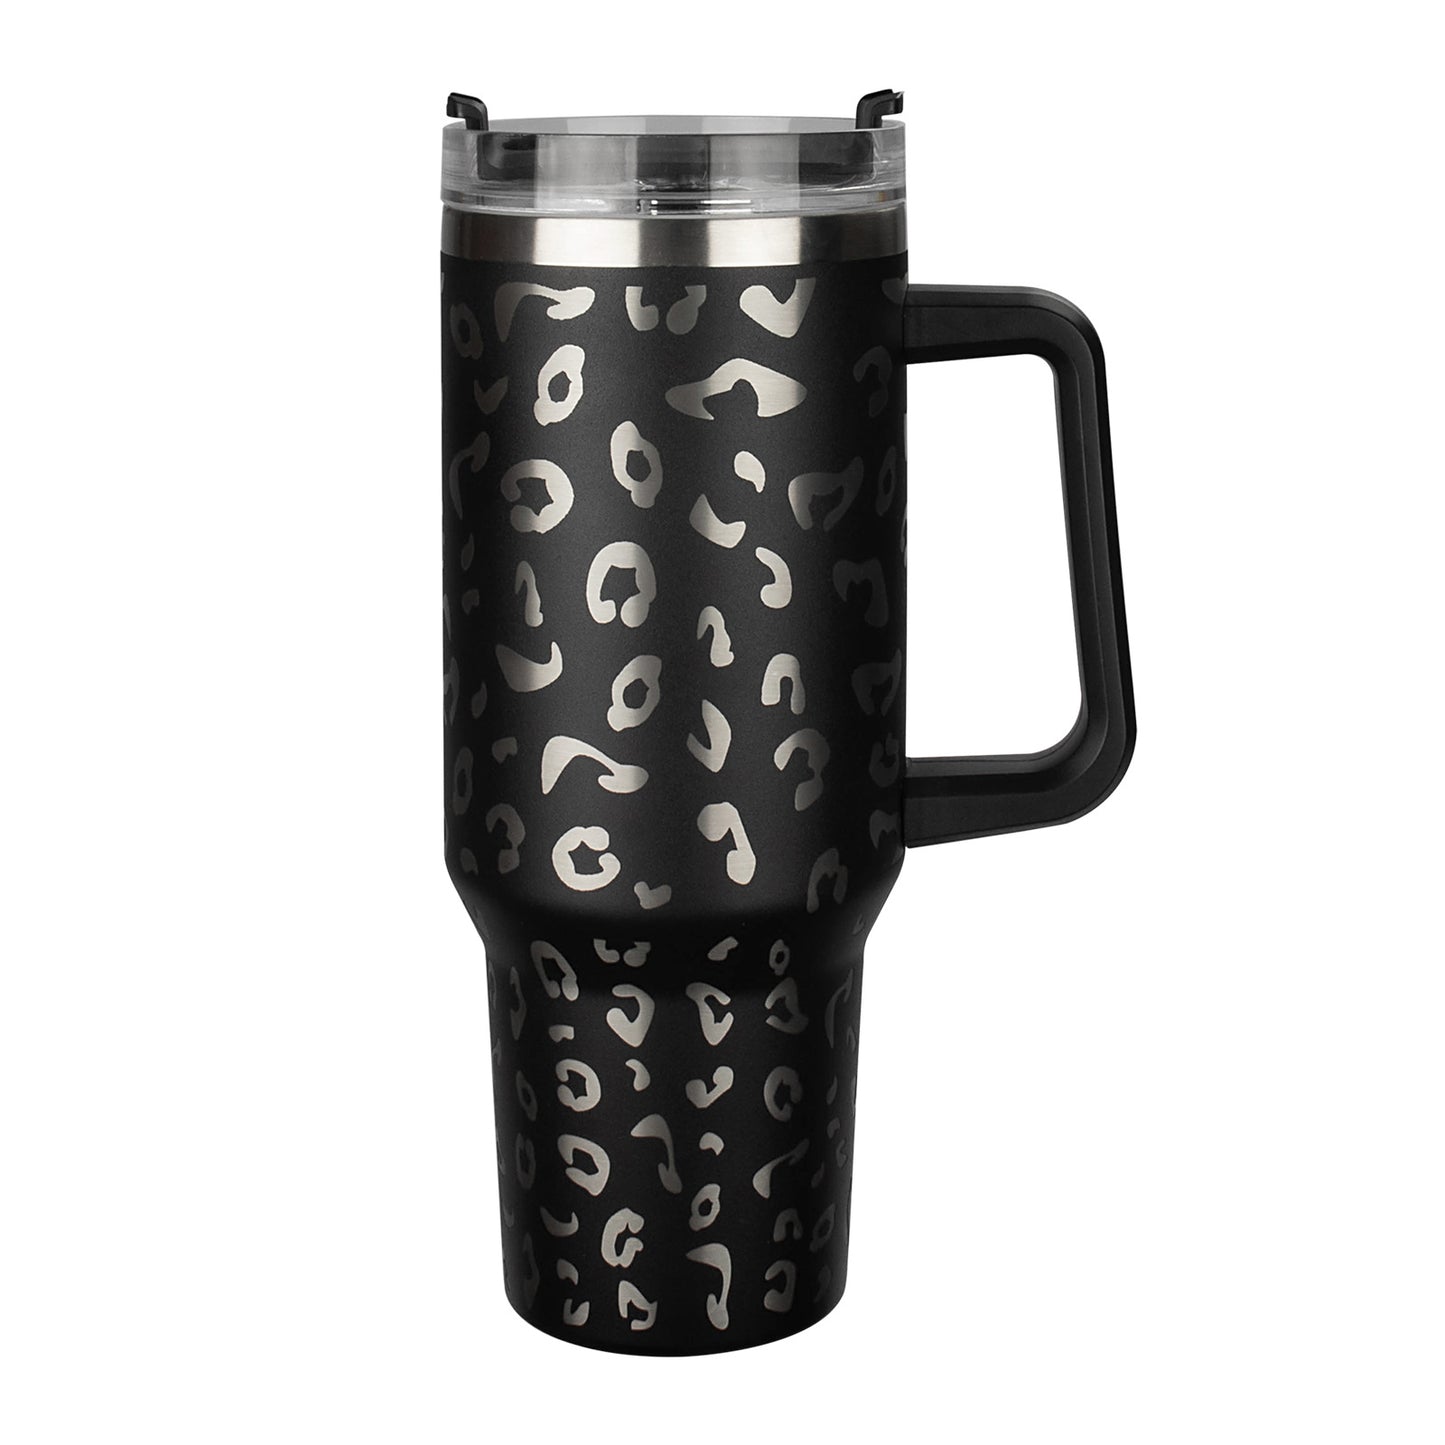 Insulated Reusable Stainless Steel Travel Mug Keeps Drinks Cold up to 24 Hours, 40 oz Tumbler with Handle and Straw Lid